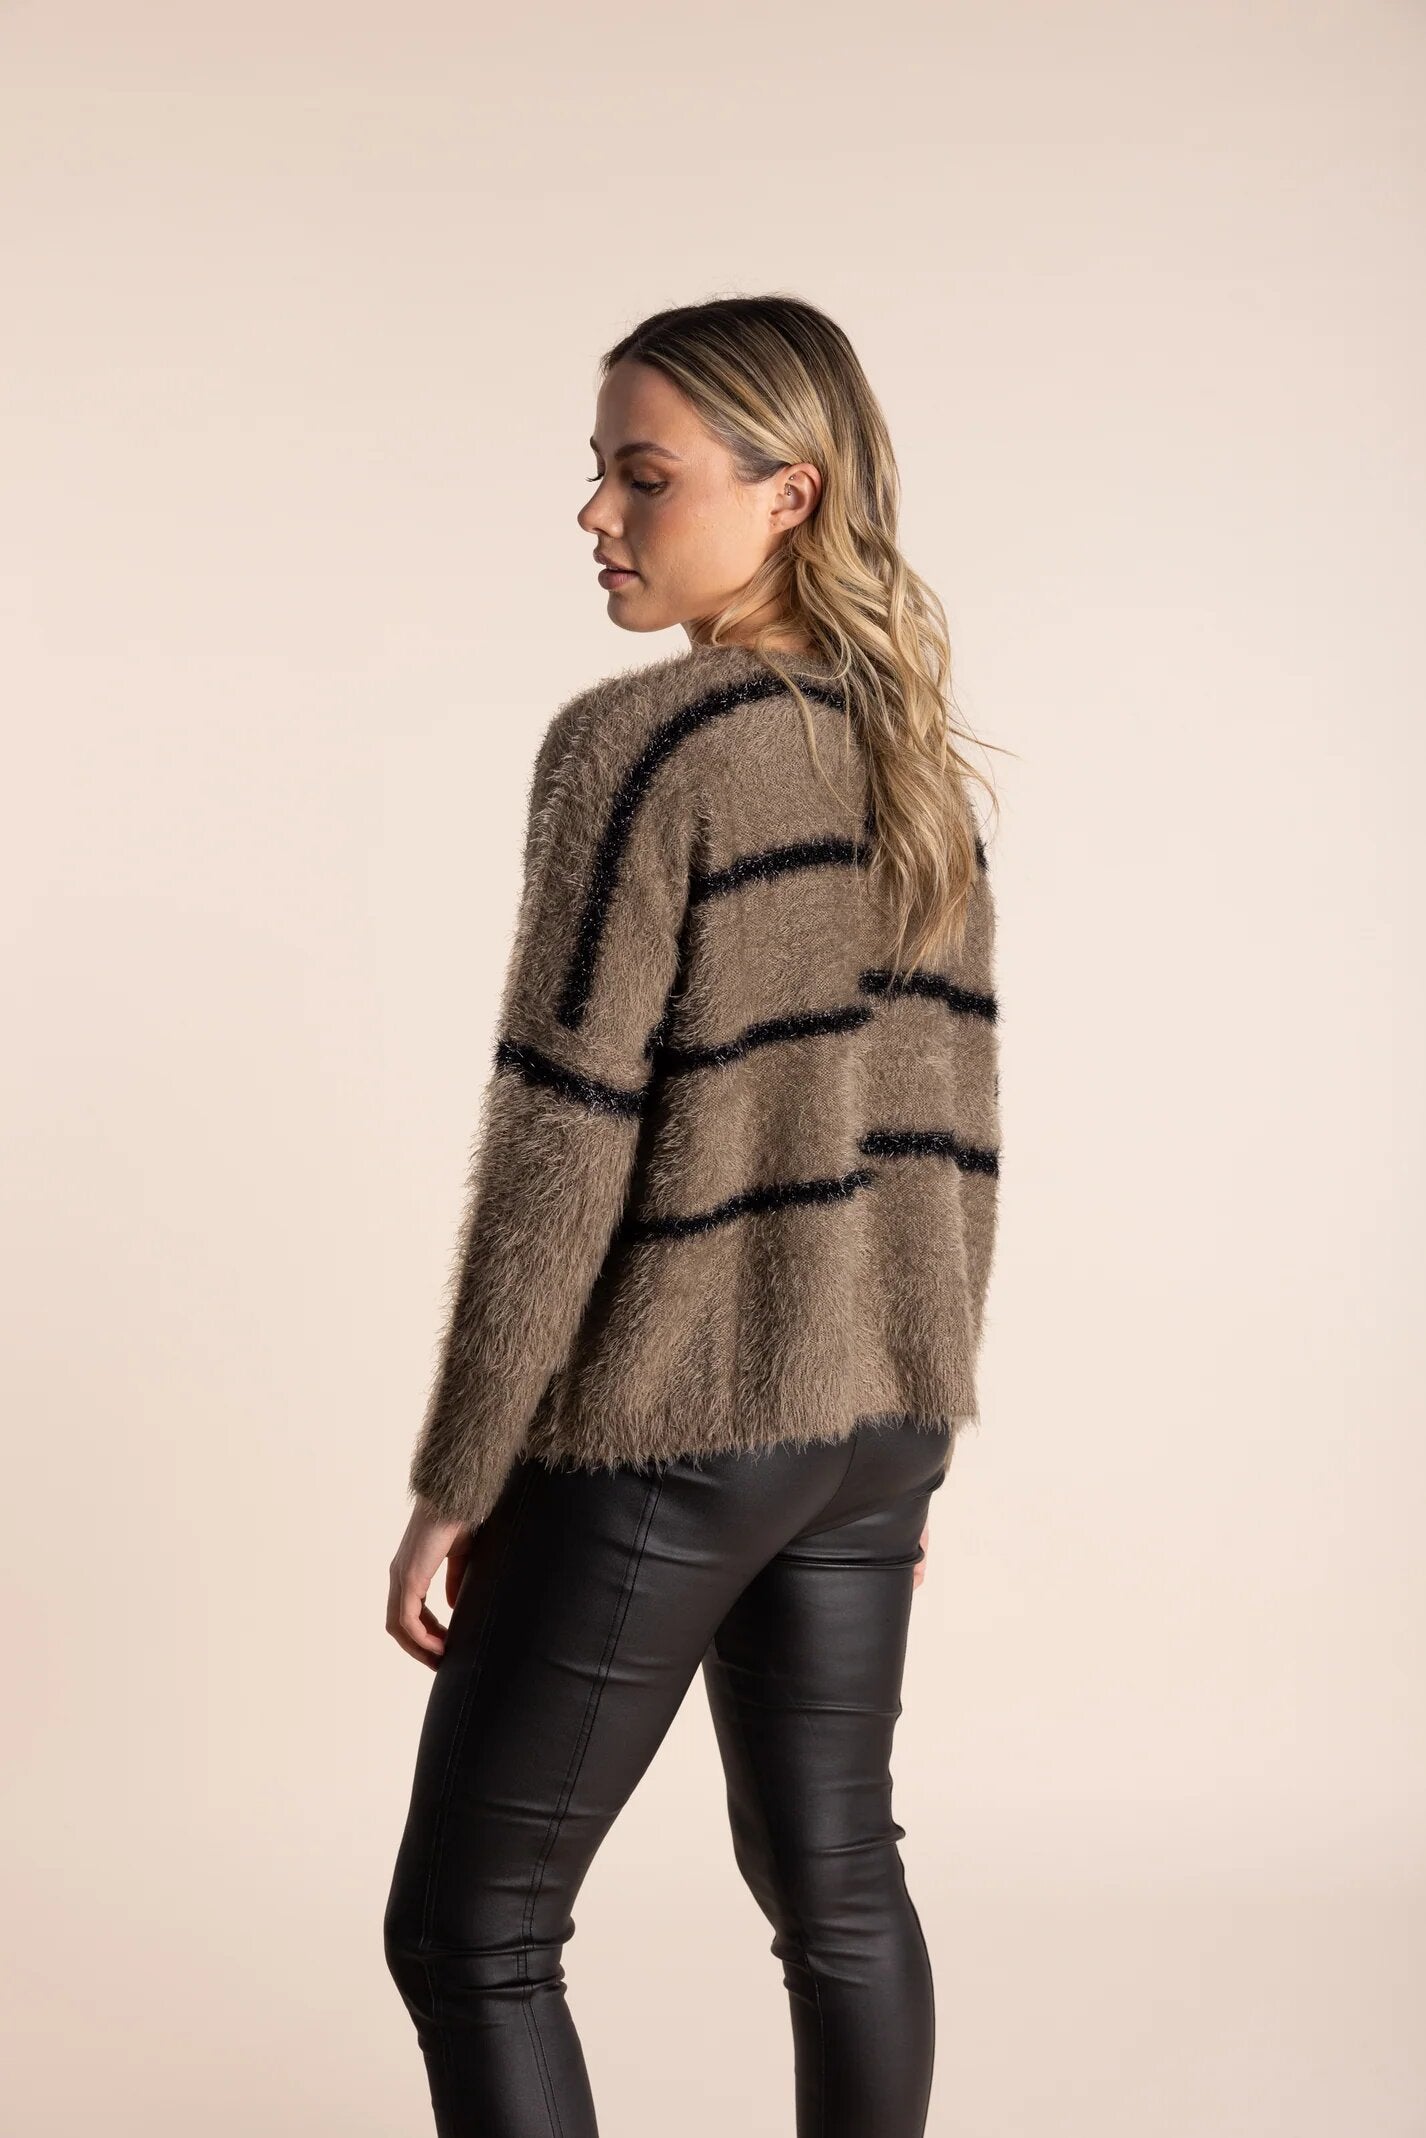 Boxy Feather Knit - 40% OFF AT CHECKOUT